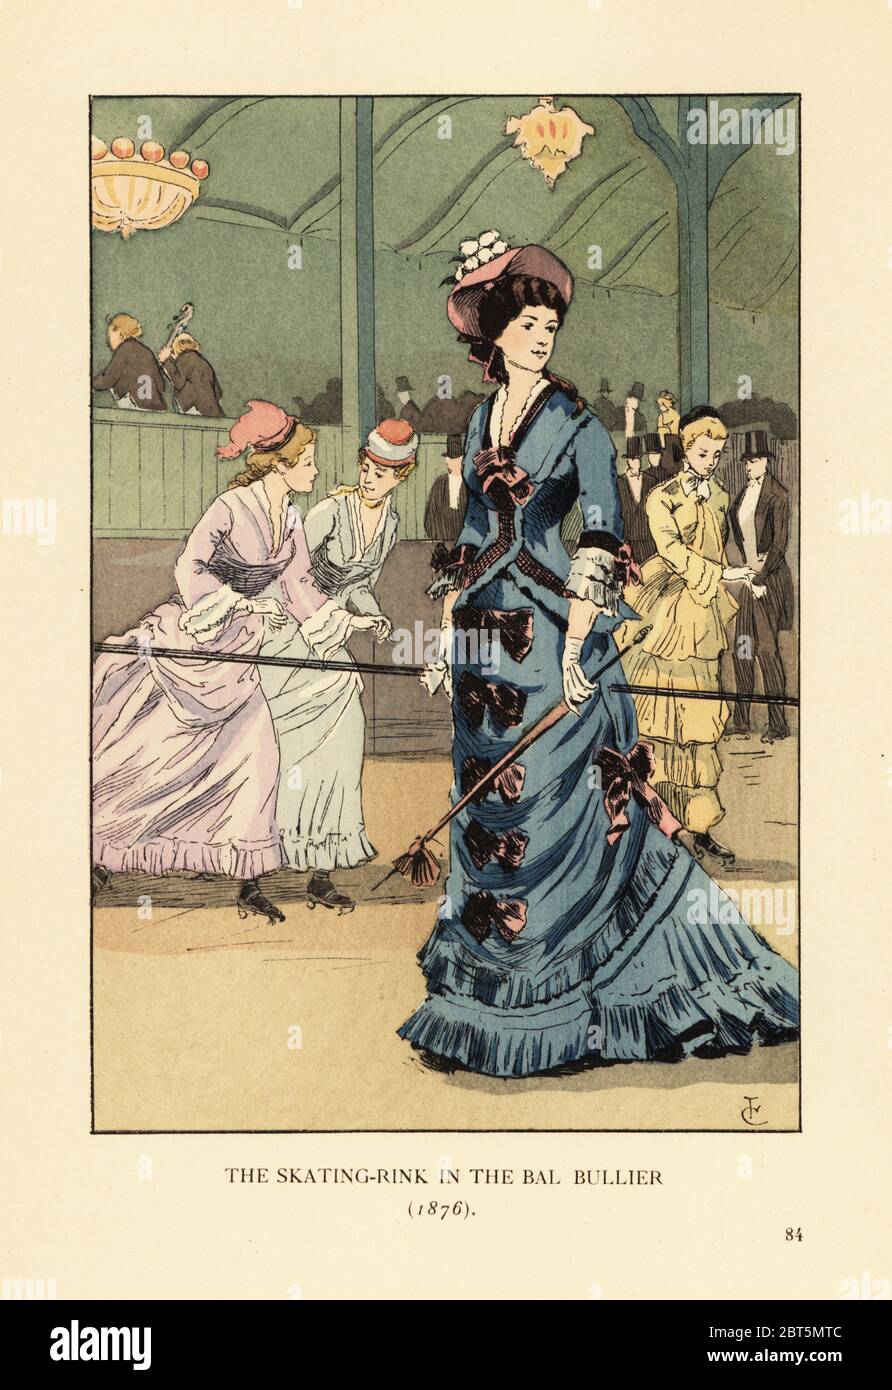 The skating rink in the Bal Bullier, 1876. Fashionable woman in dress with train and ribbon bows watching girls roller skating at Francois Bulliers ballroom, avenue de l'Observatoire, Paris. Band musicians in the balcony. Handcoloured lithograph by R.V. after an illustration by Francois Courboin from Octave Uzannes Fashion in Paris, William Heinemann, London, 1898. Stock Photo